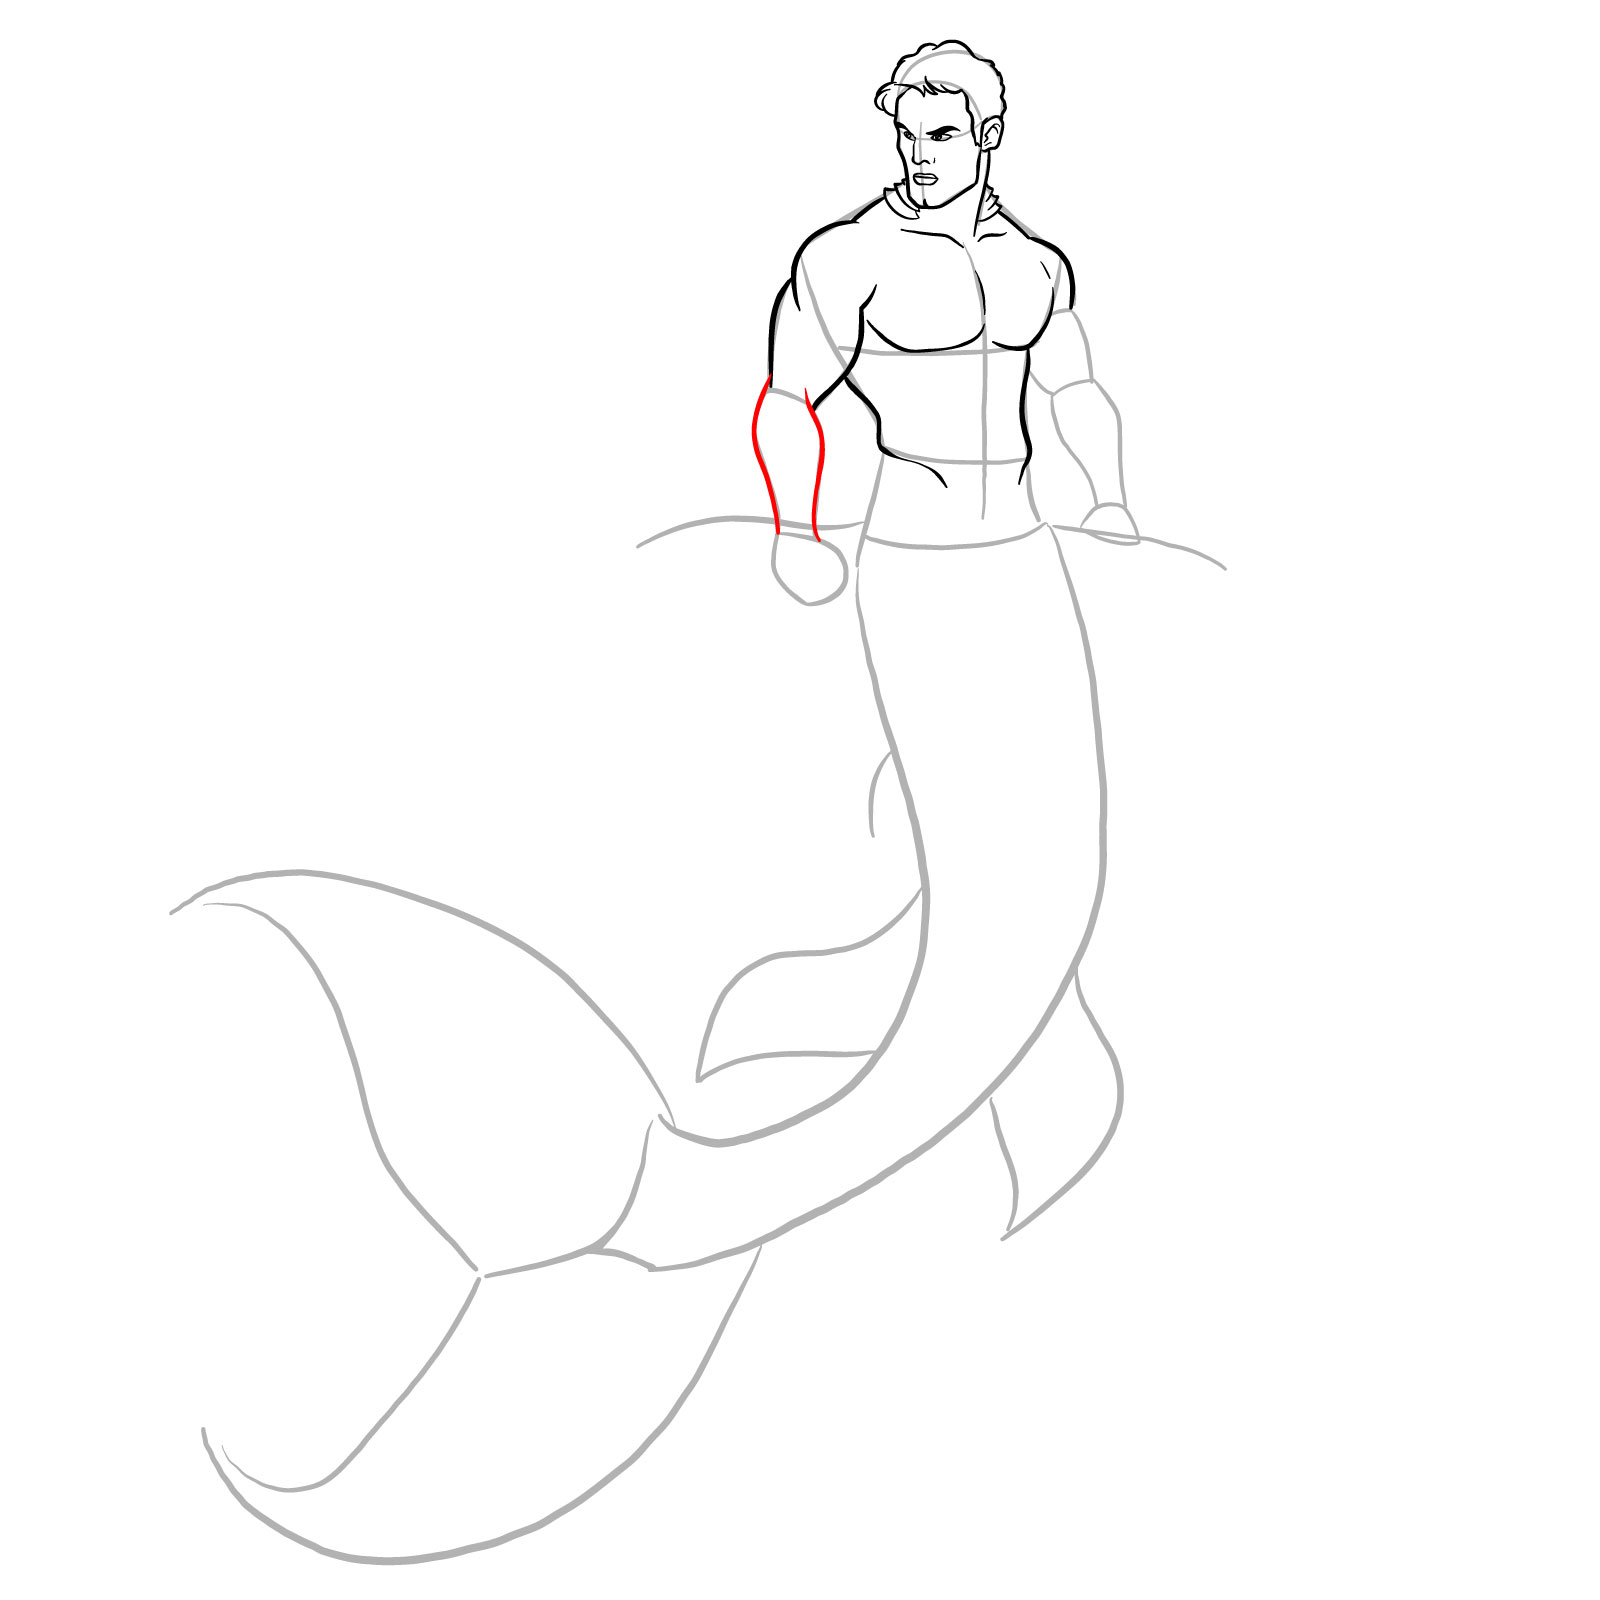 How to draw a Merman - step 16